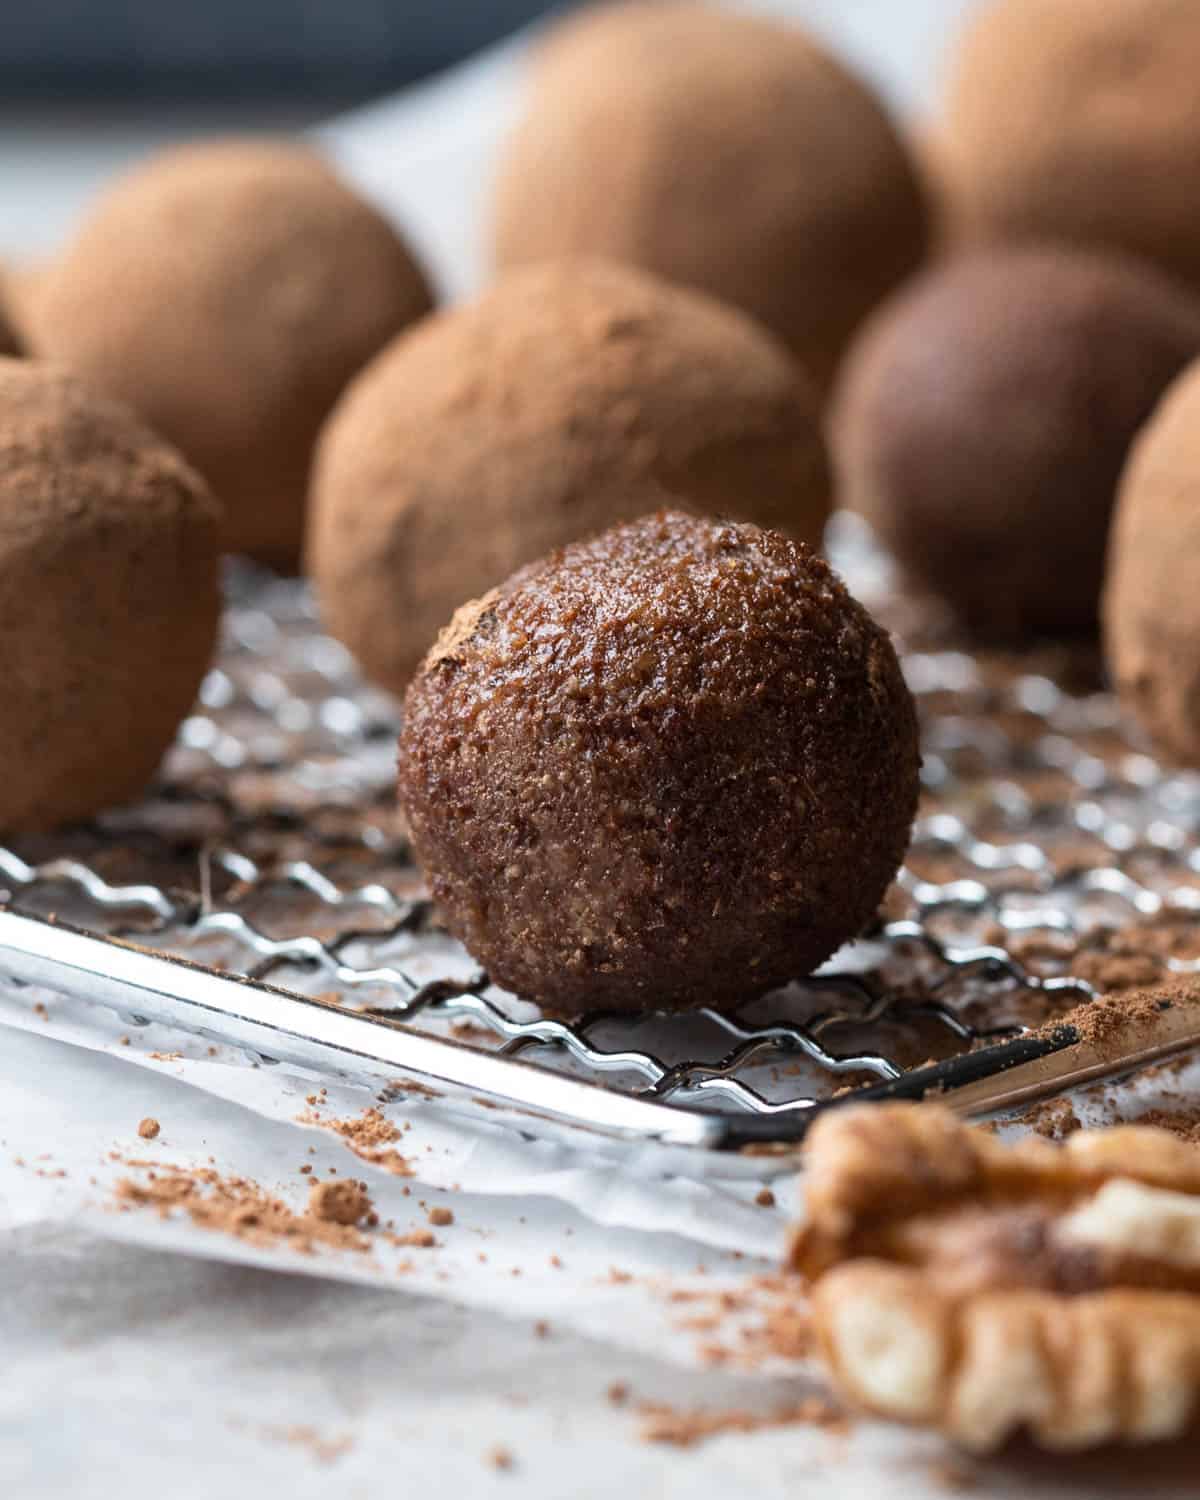 This image features a moist-looking bliss ball with a rich, dark color contrasting against the lighter cocoa-dusted bliss balls in the background. The focus on the darker ball in the forefront, resting on a wire cooling rack, emphasizes its unique texture, indicative of the variety of healthy ingredients used to make these bliss balls appealing to kids.